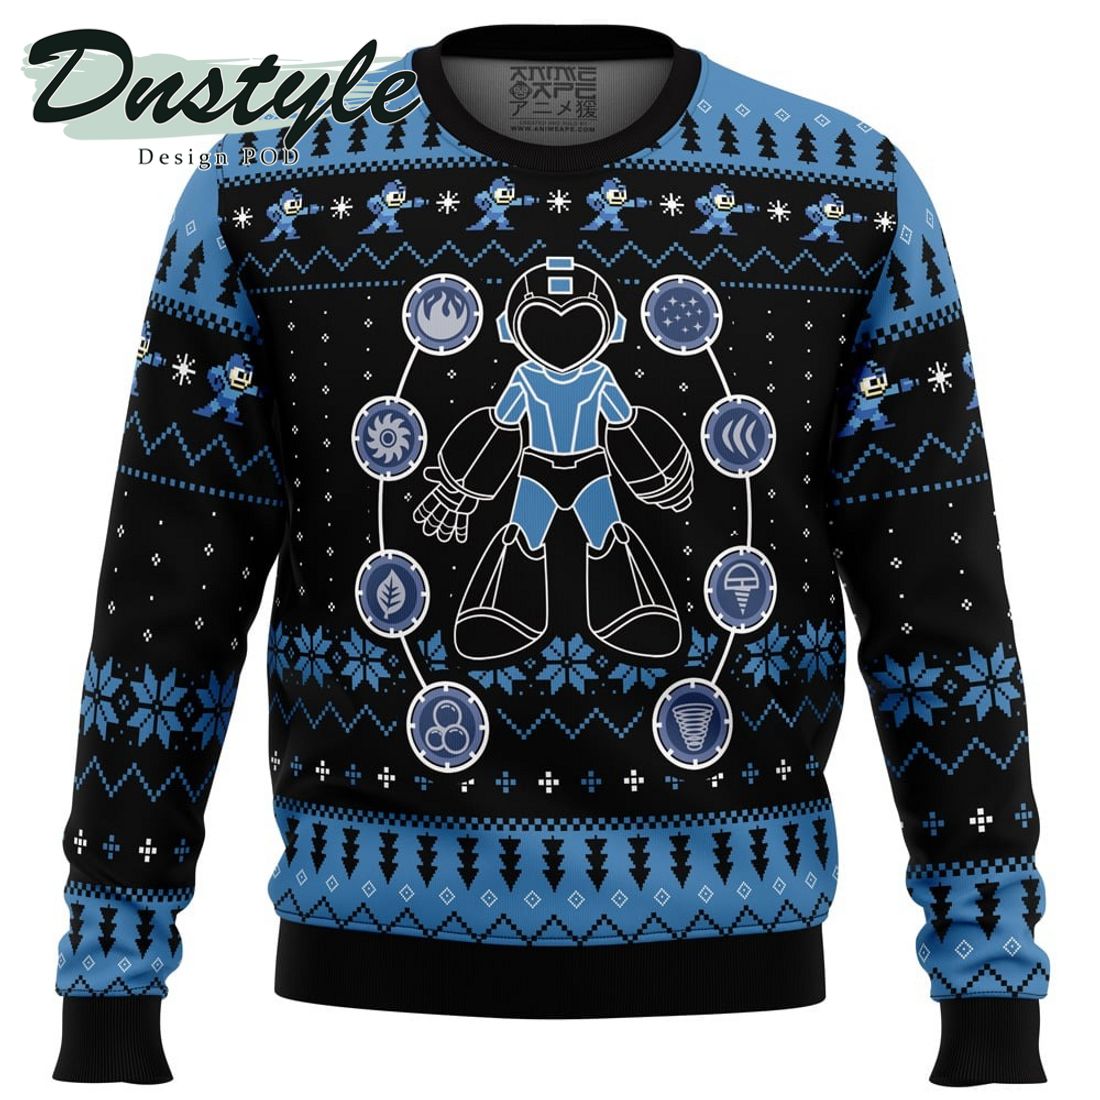 Modelo Especial Beer Ugly Christmas Sweater